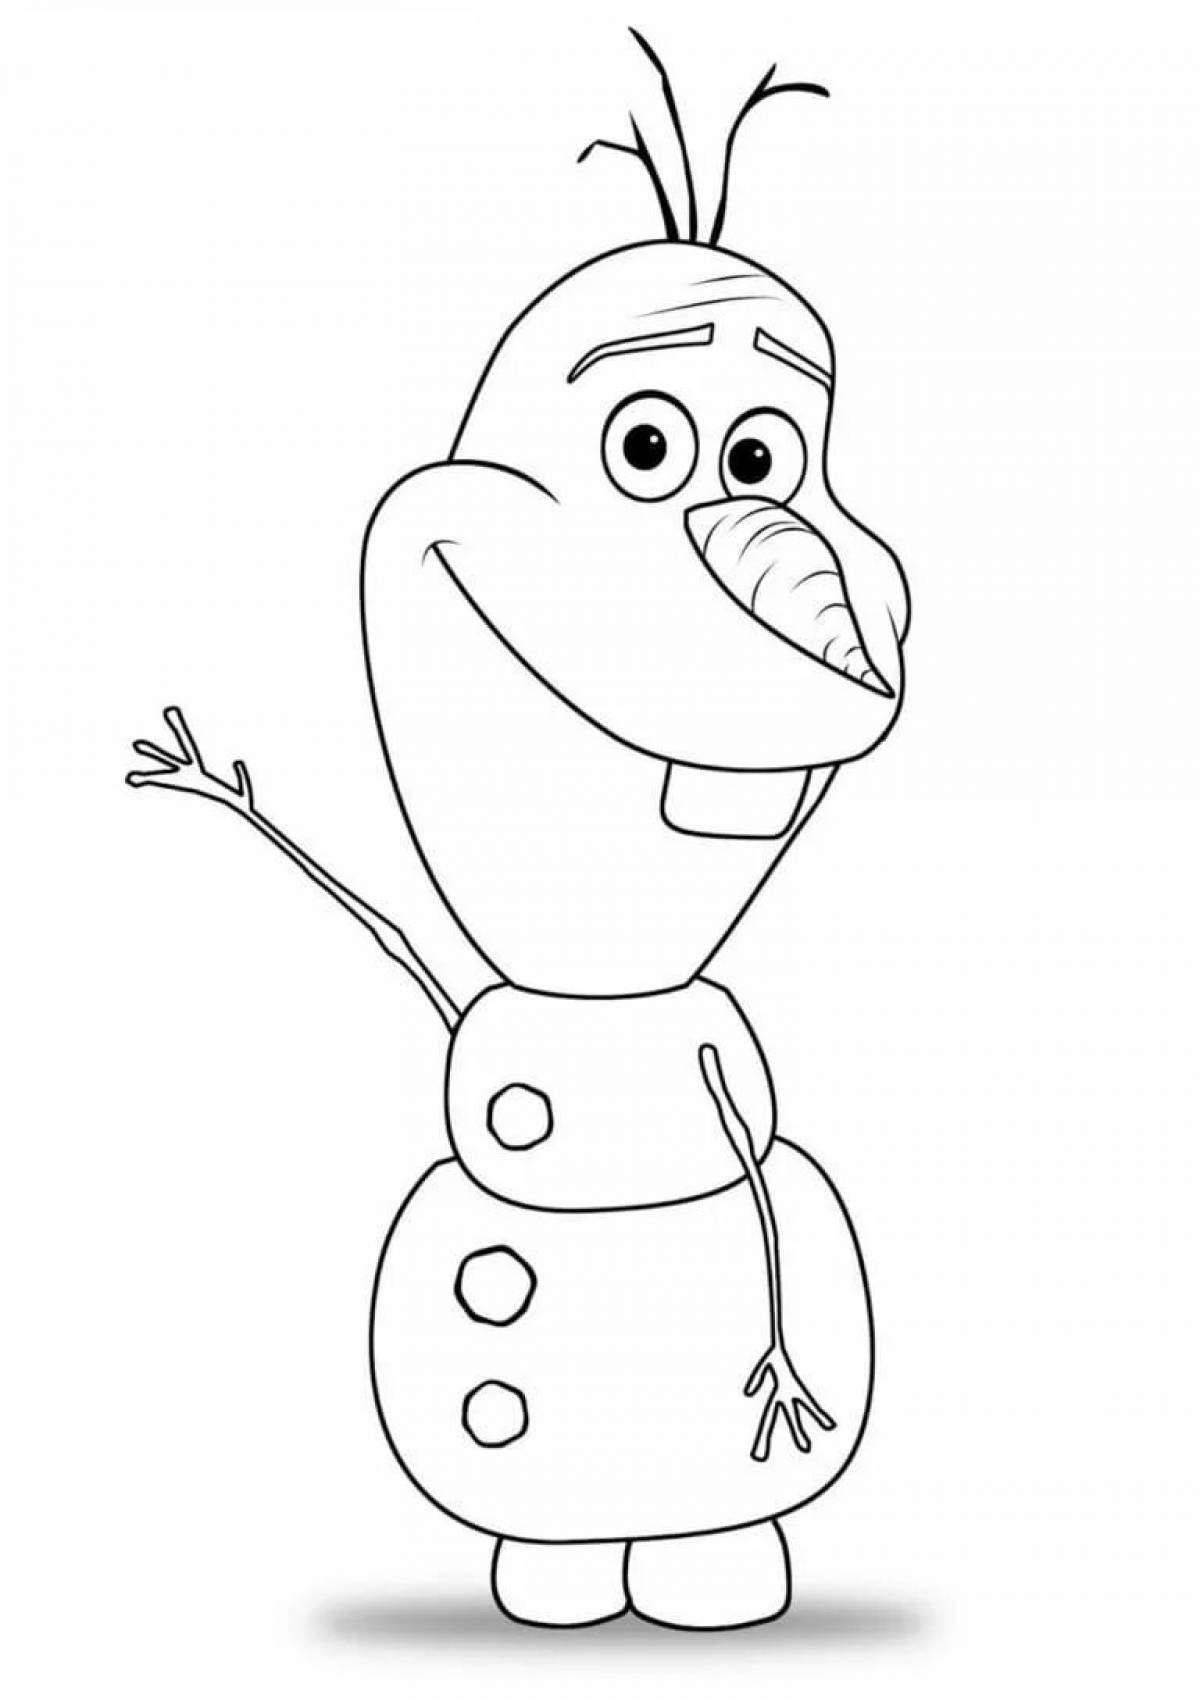 Attractive olaf coloring book for kids